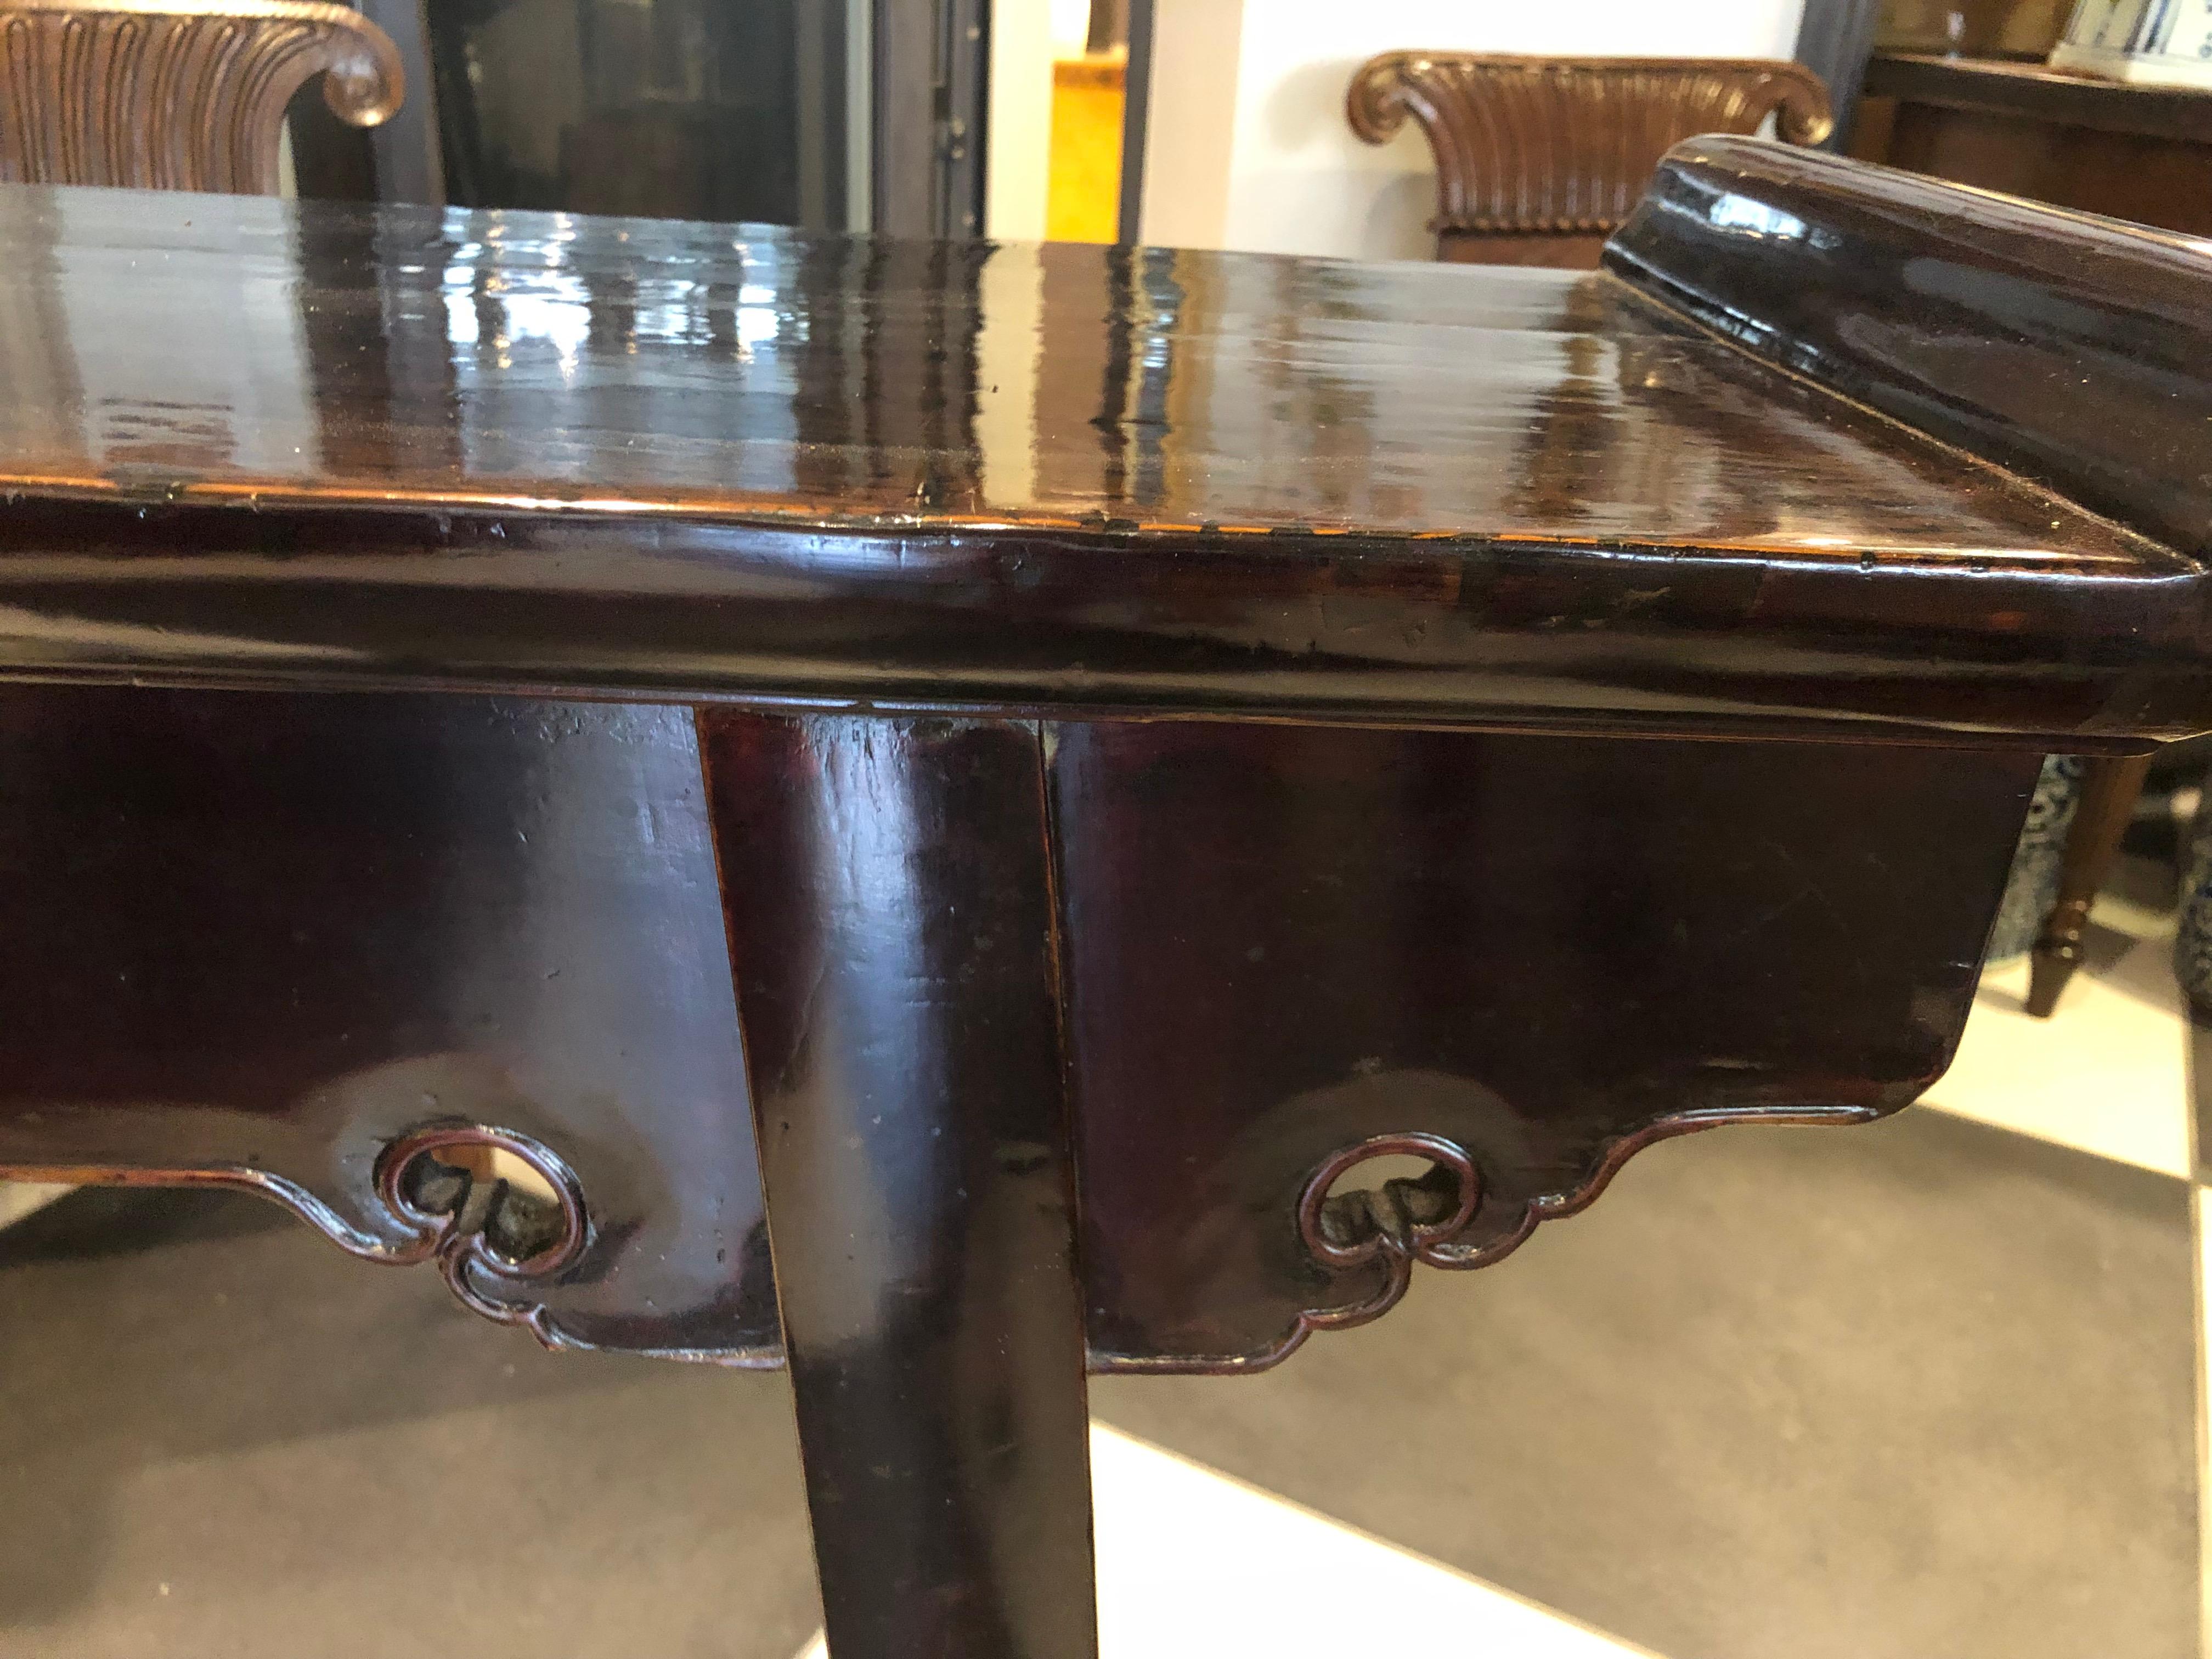 This black lacquered alter table has been restored to its former glory! Having two legs cloud Front Design and two secret drawers to the sides. Excellent condition from Shanxi Provence, China, late 18th century - early 19th century.